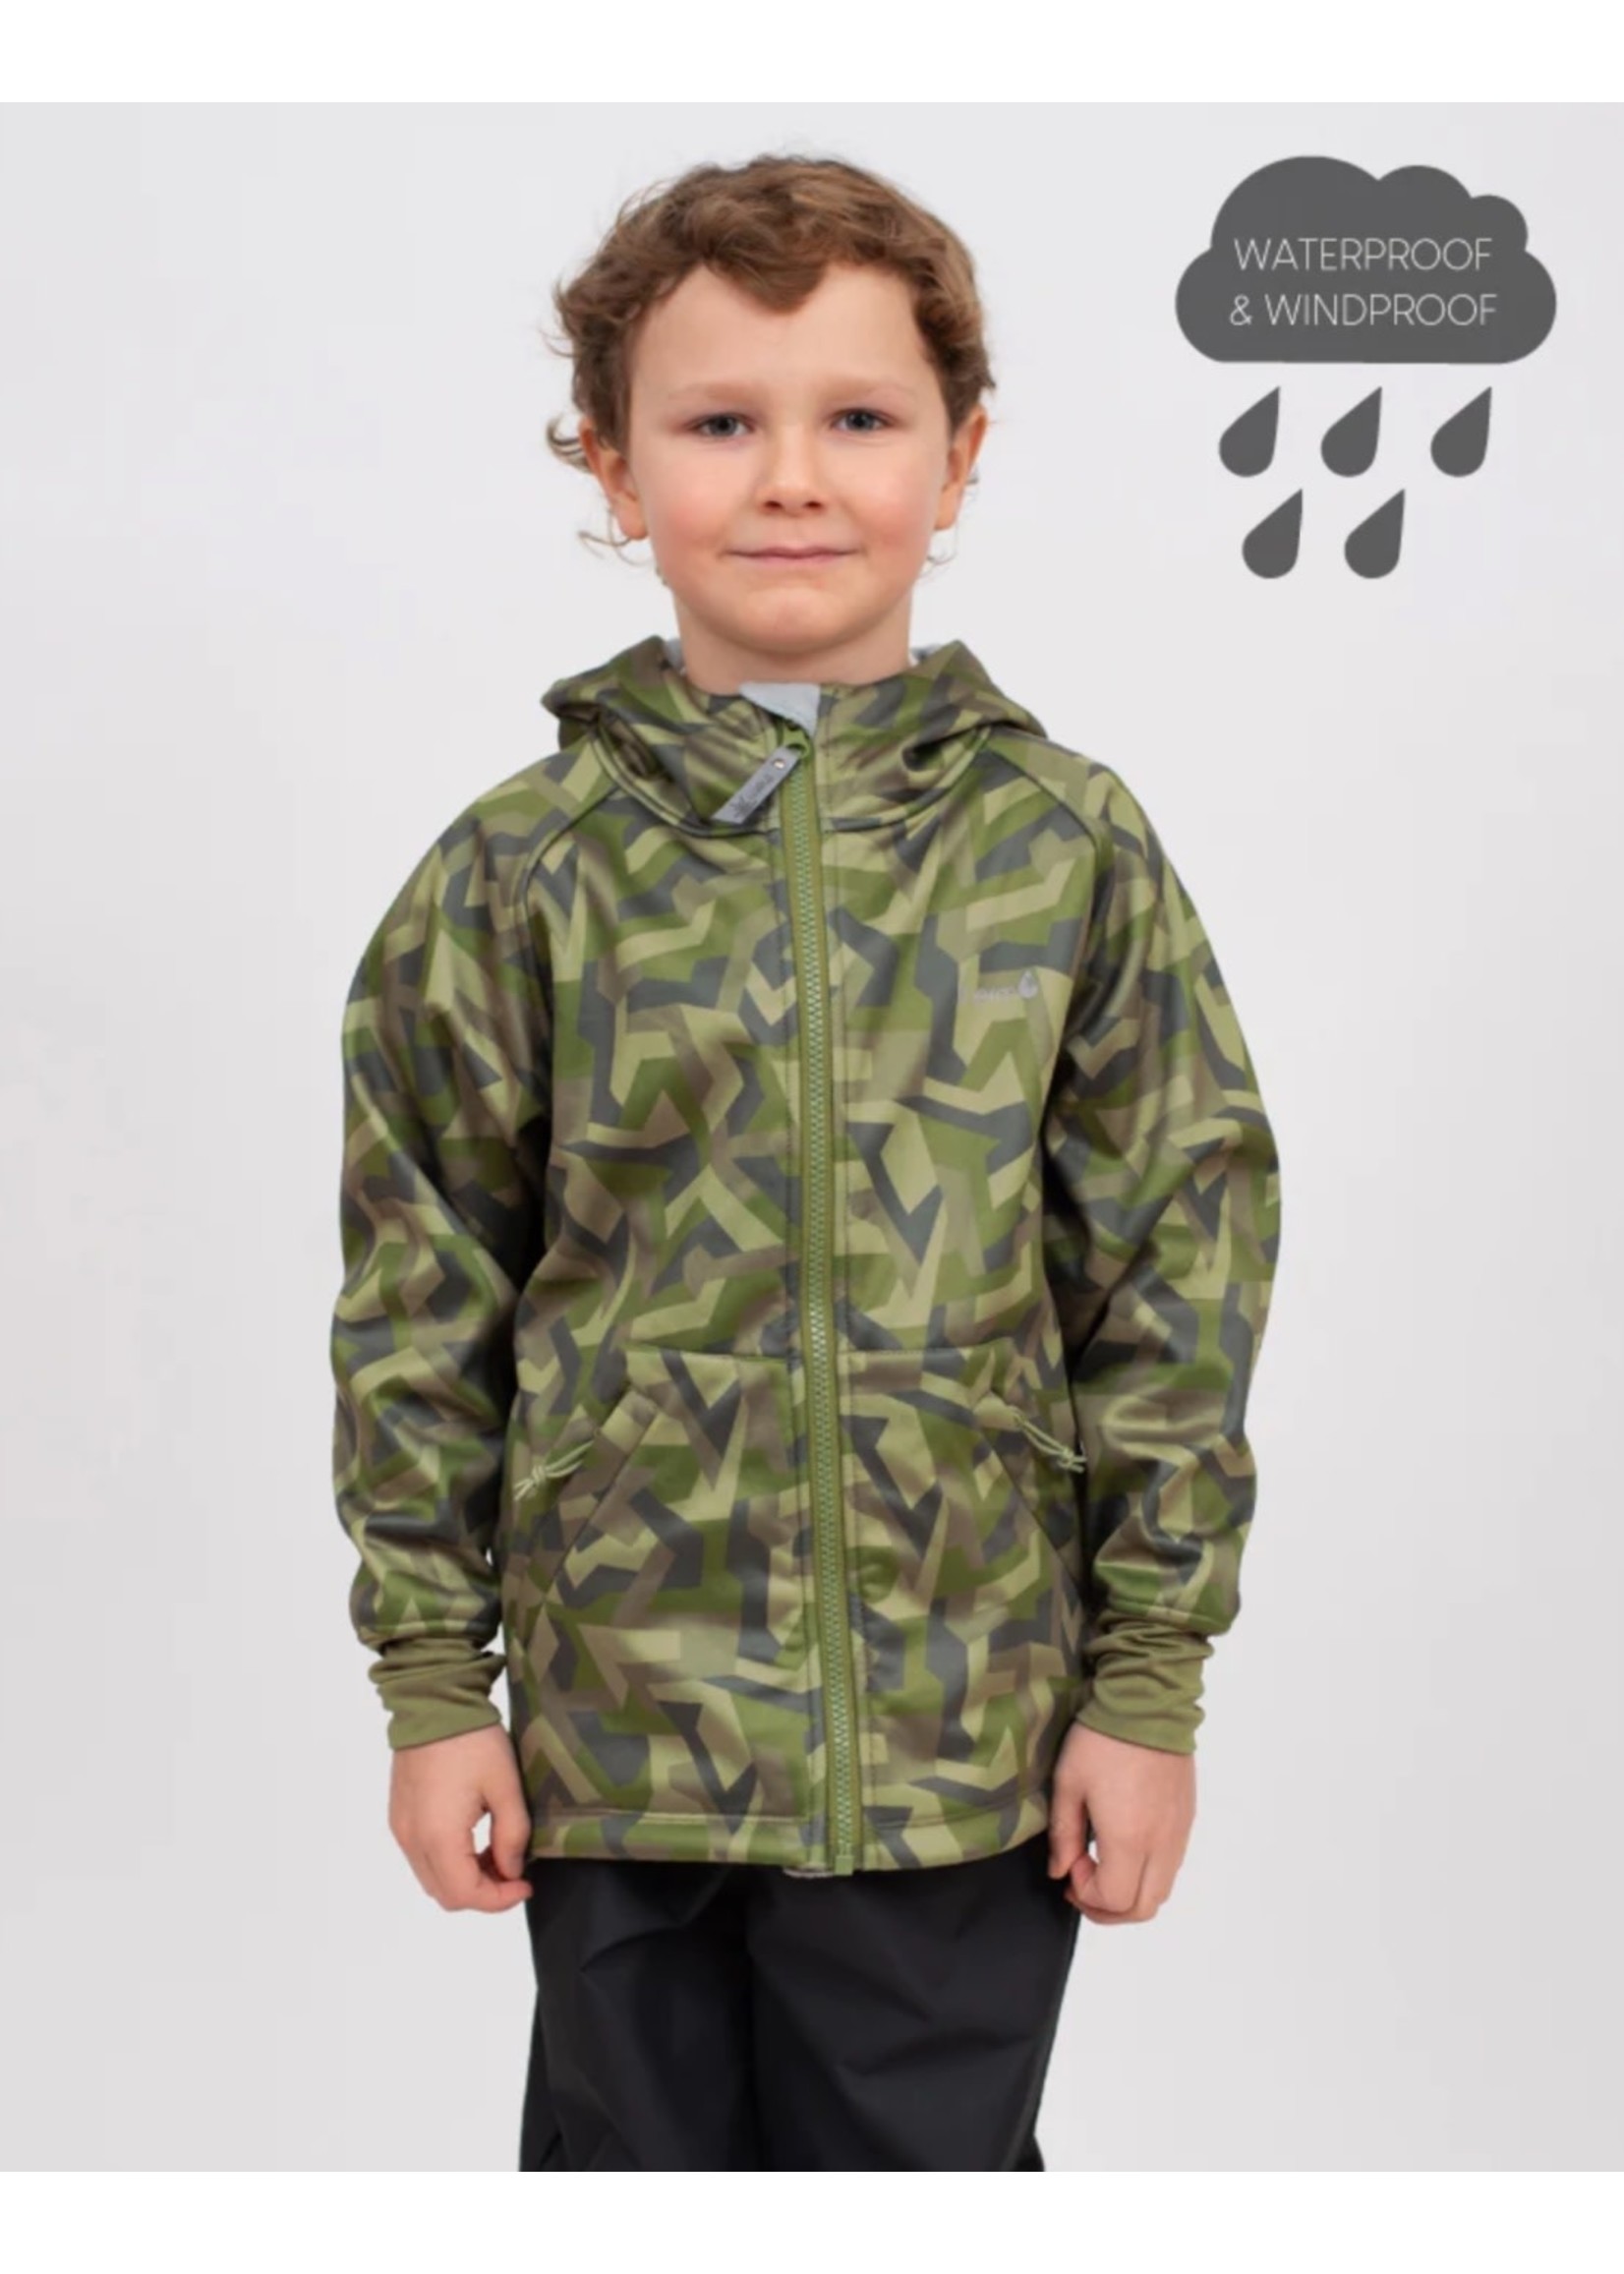 Therm Therm Kids, All-Weather Hoodie - Geo Camo | Waterproof Windproof Eco